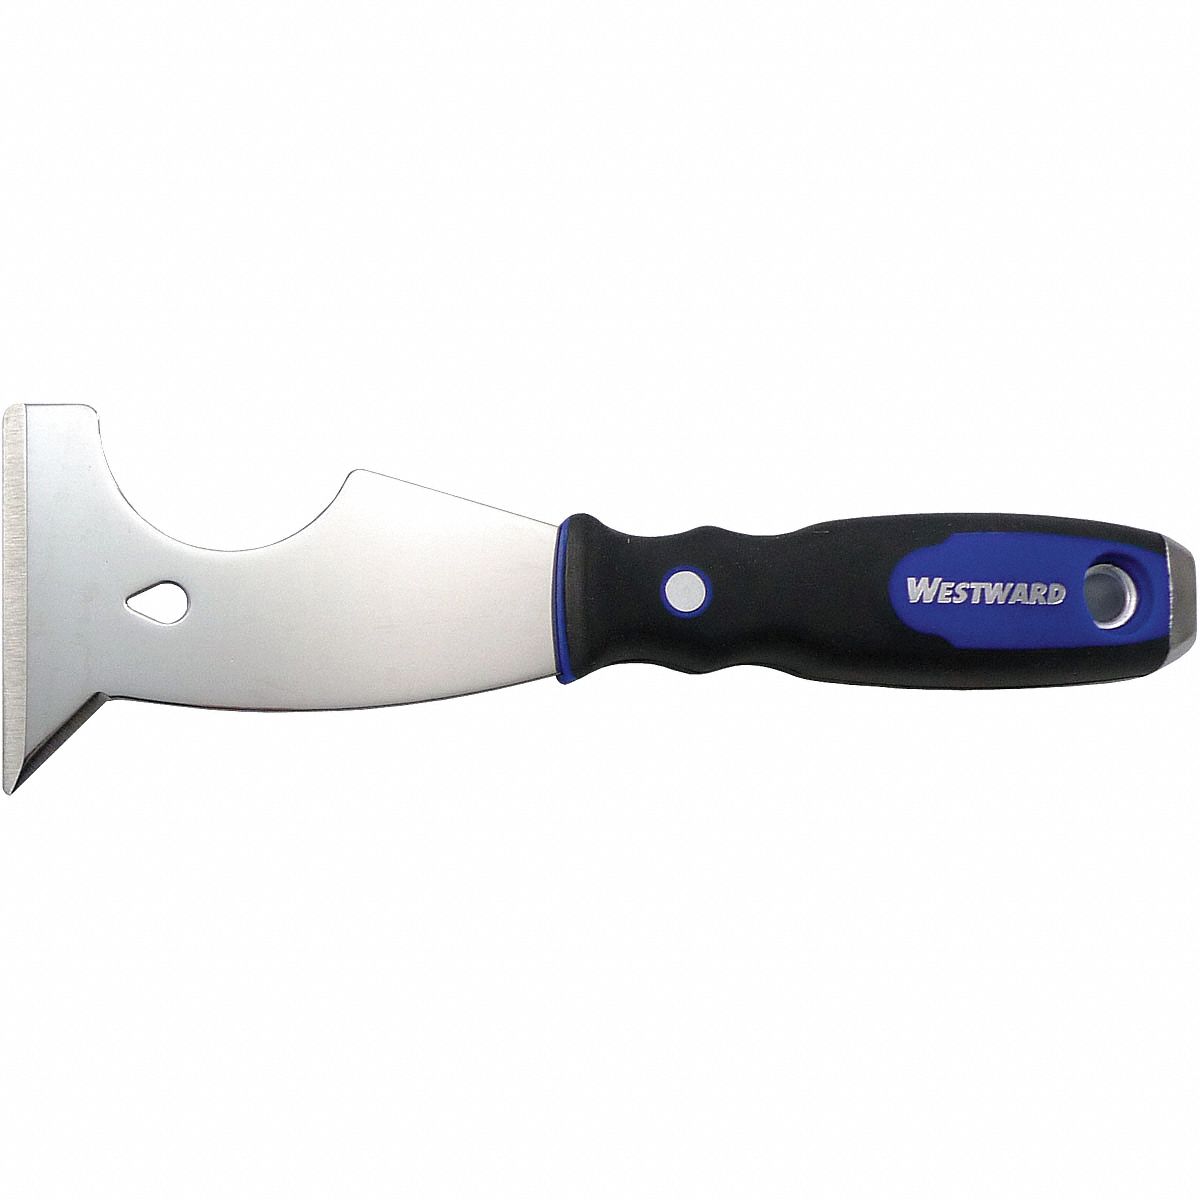 WESTWARD, 3 in Blade Wd, Stainless Steel, Painters Tool - 46A910|46A910 ...